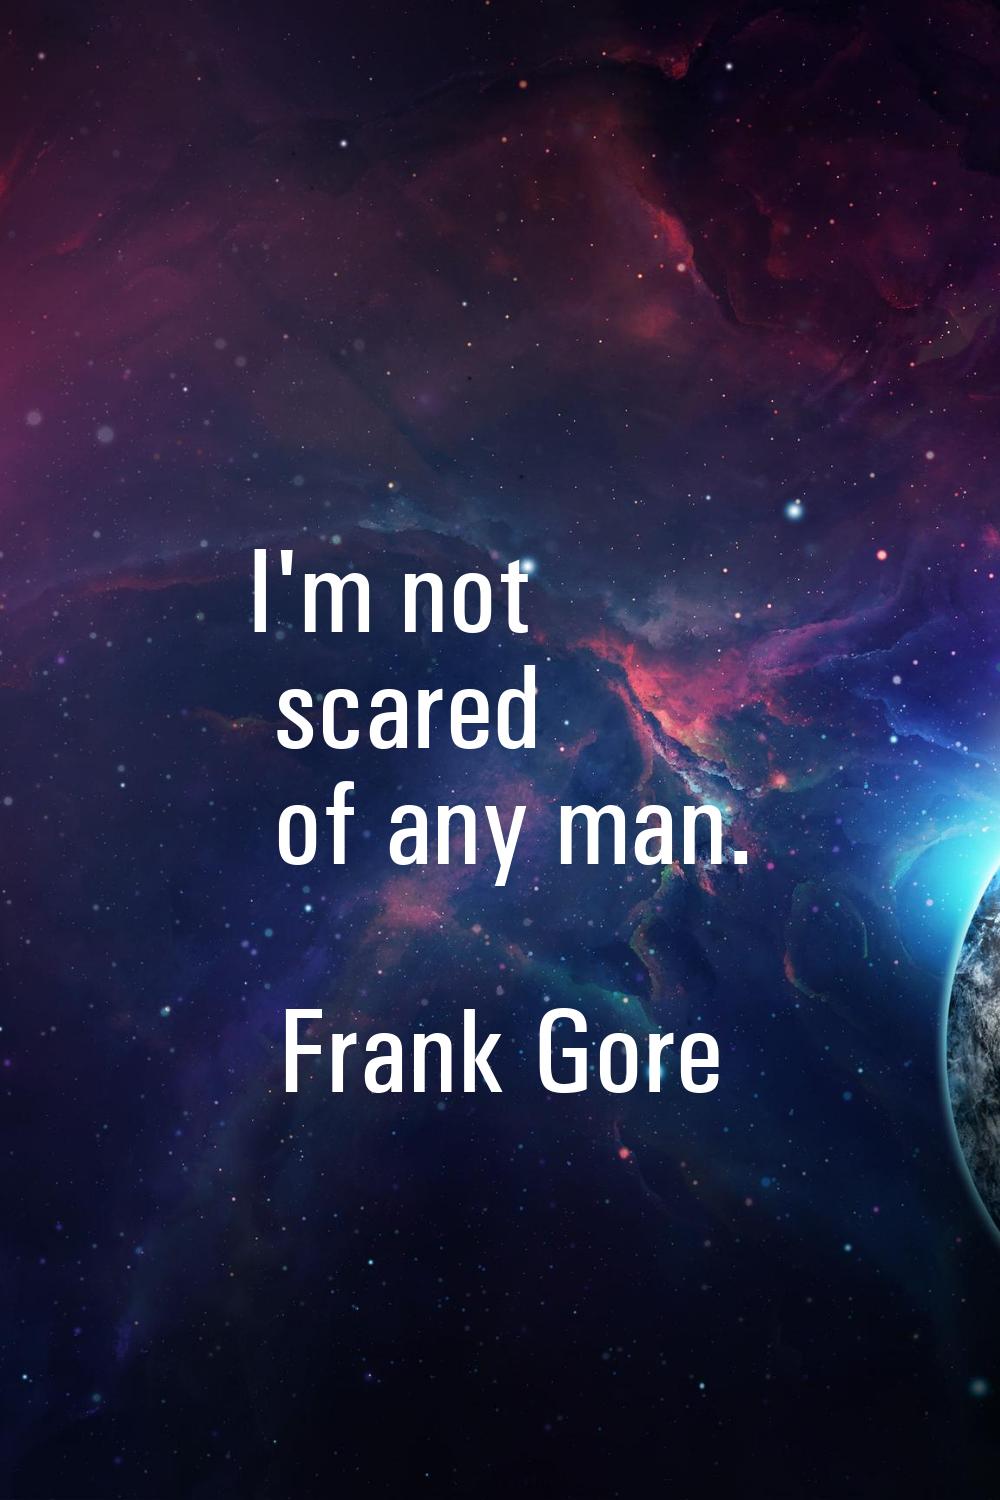 I'm not scared of any man.